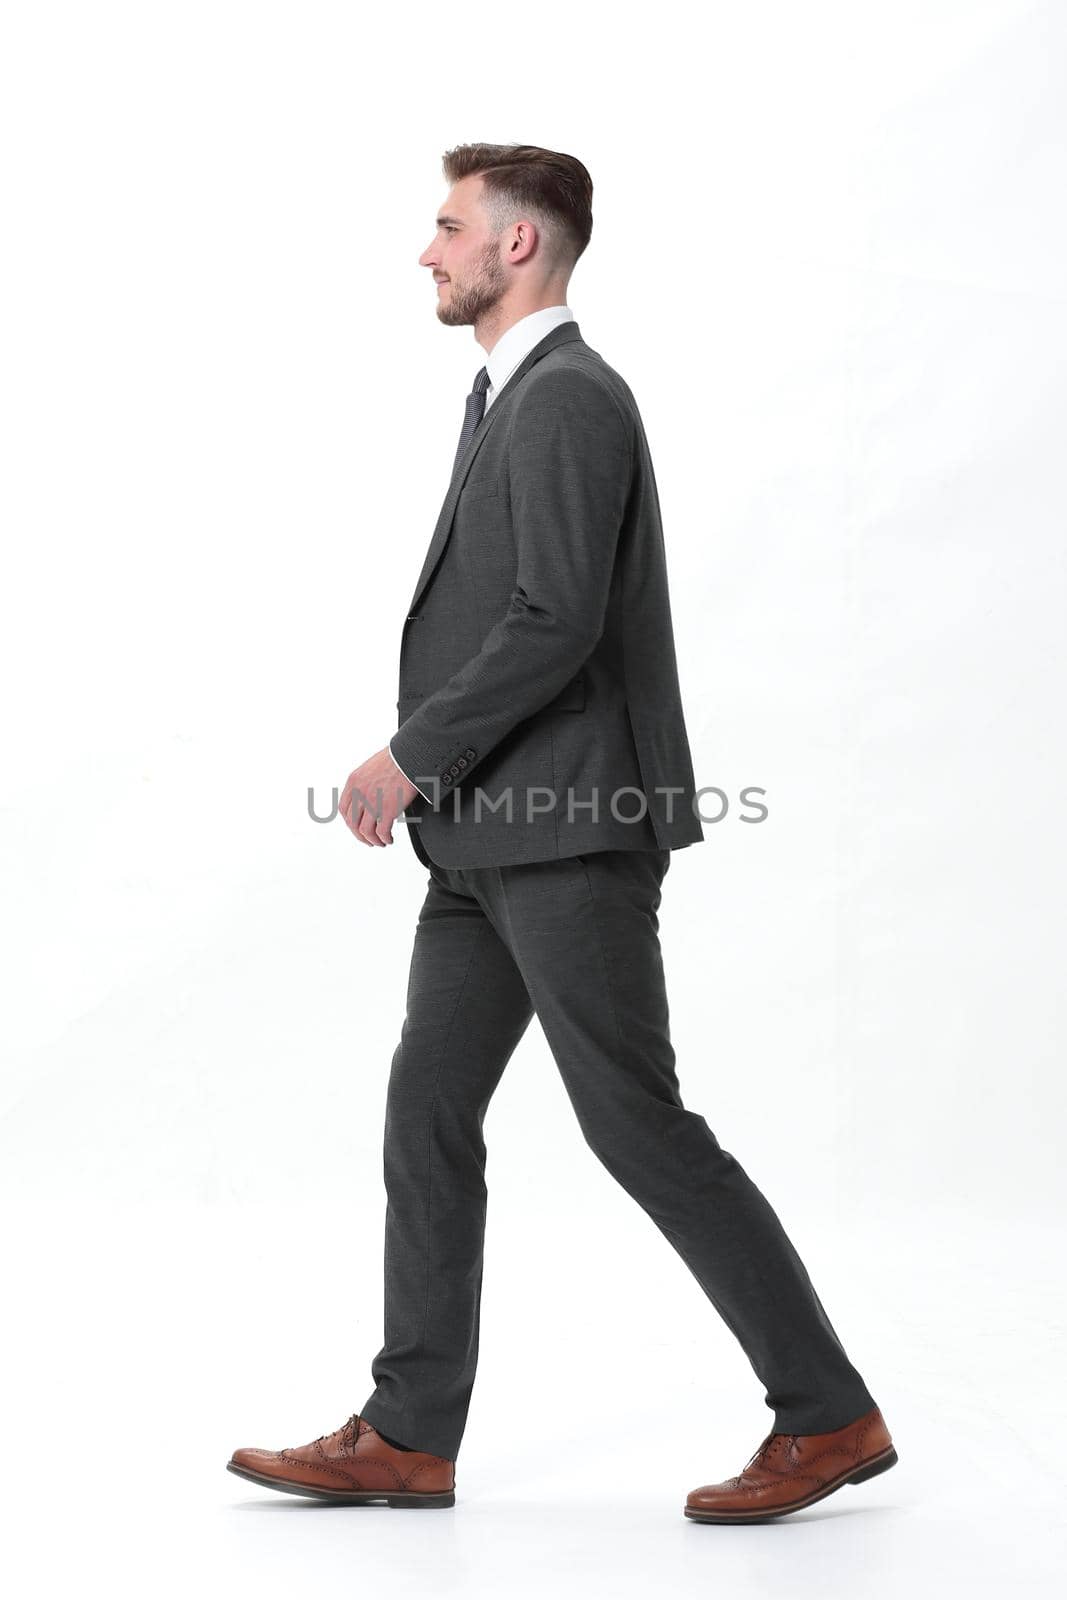 side view. the young businessman confidently steps forward by asdf